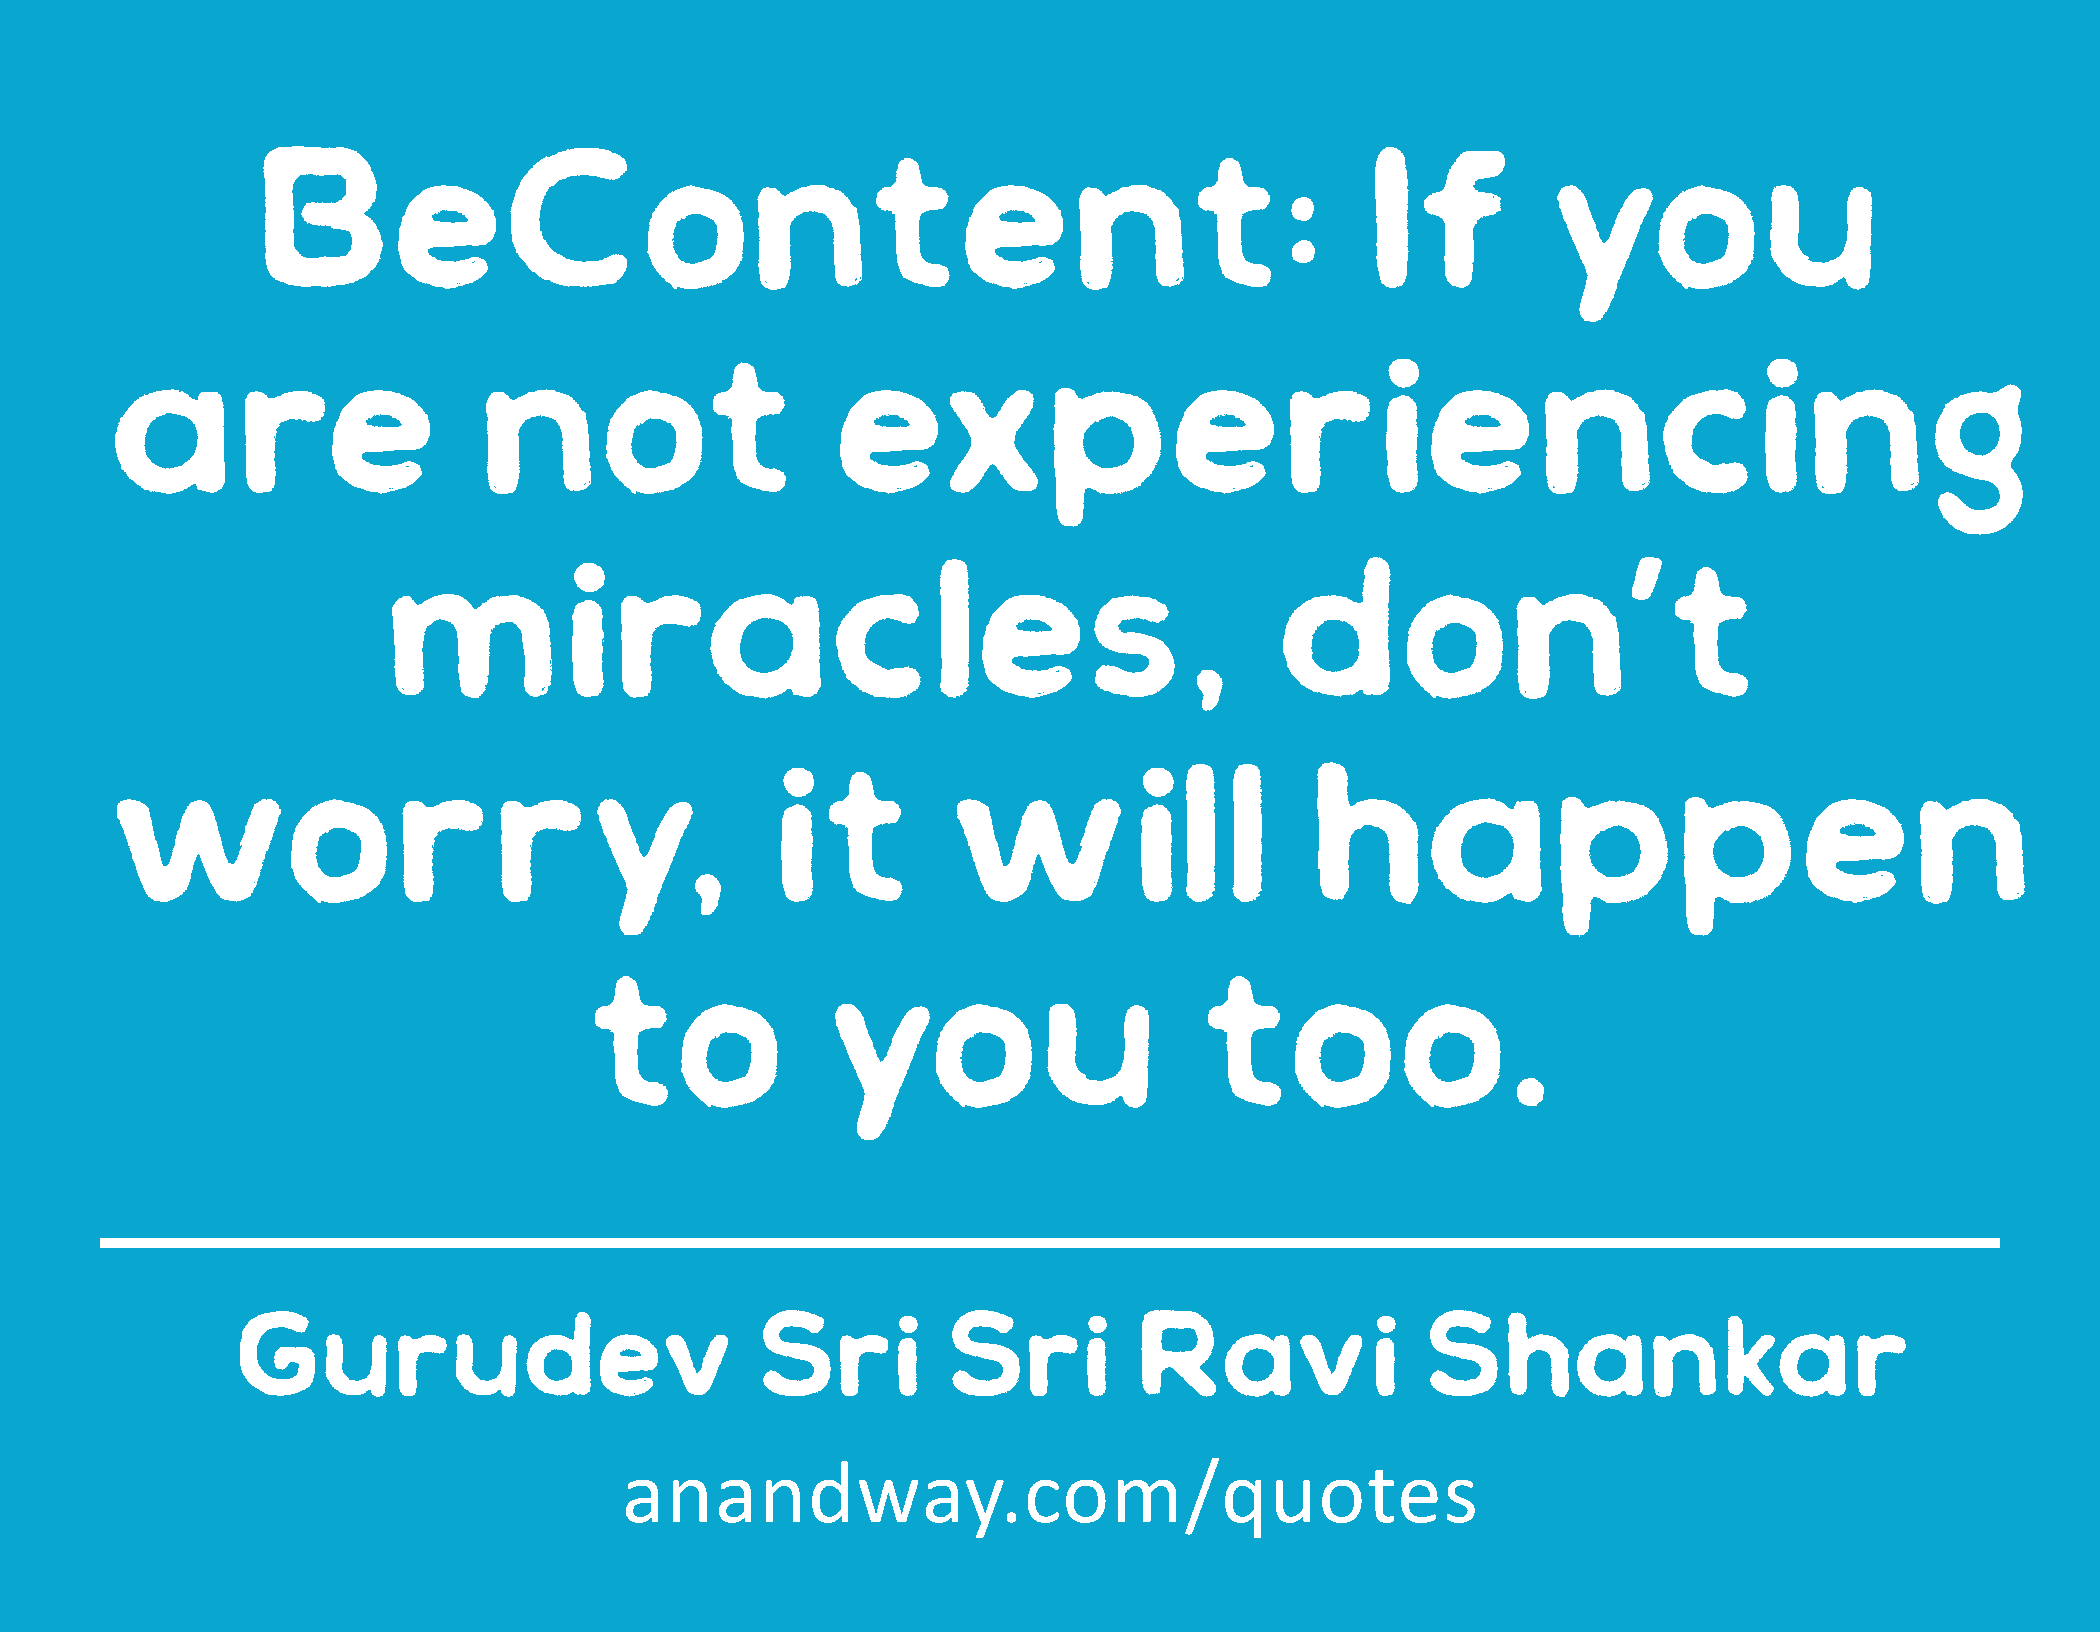 BeContent: If you are not experiencing miracles, don’t worry, it will happen to you too. 
 -Gurudev Sri Sri Ravi Shankar